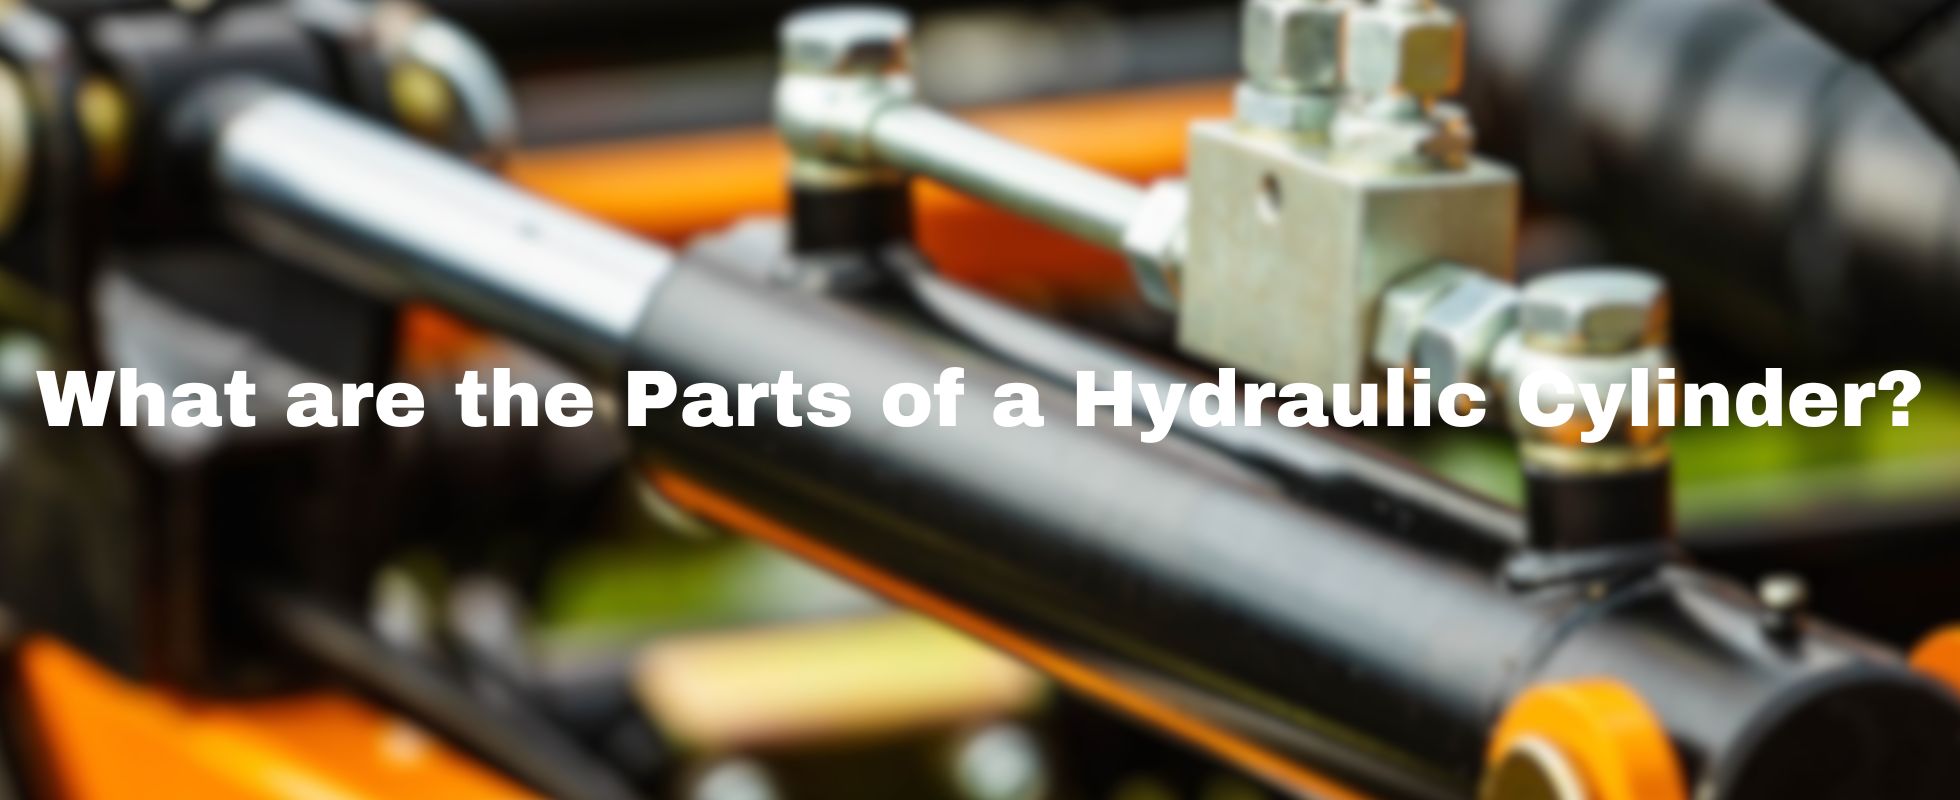 What are the Parts of a Hydraulic Cylinder